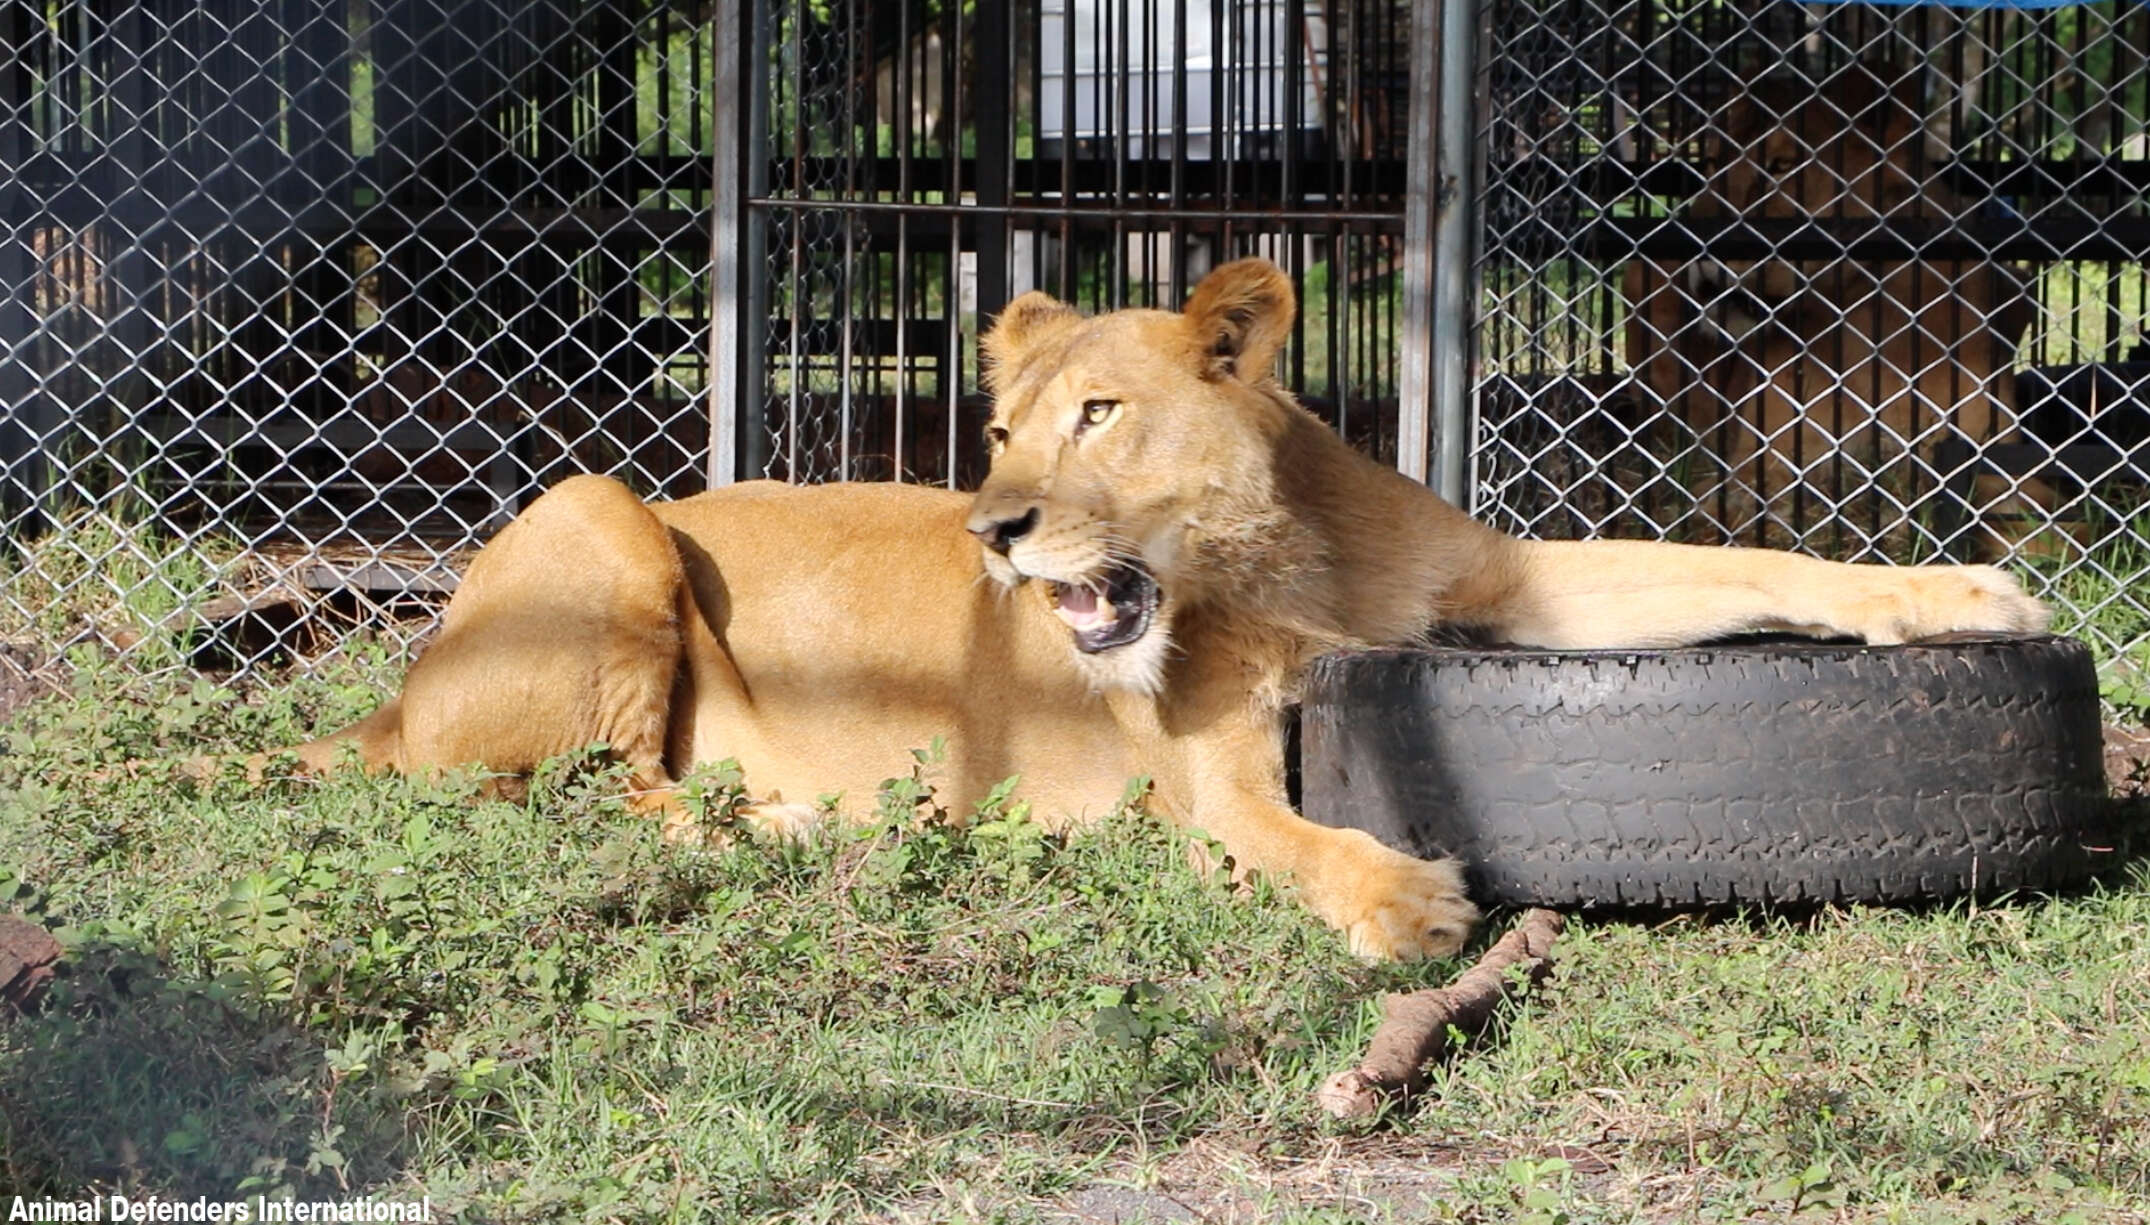 Rescued circus lion playing with tire